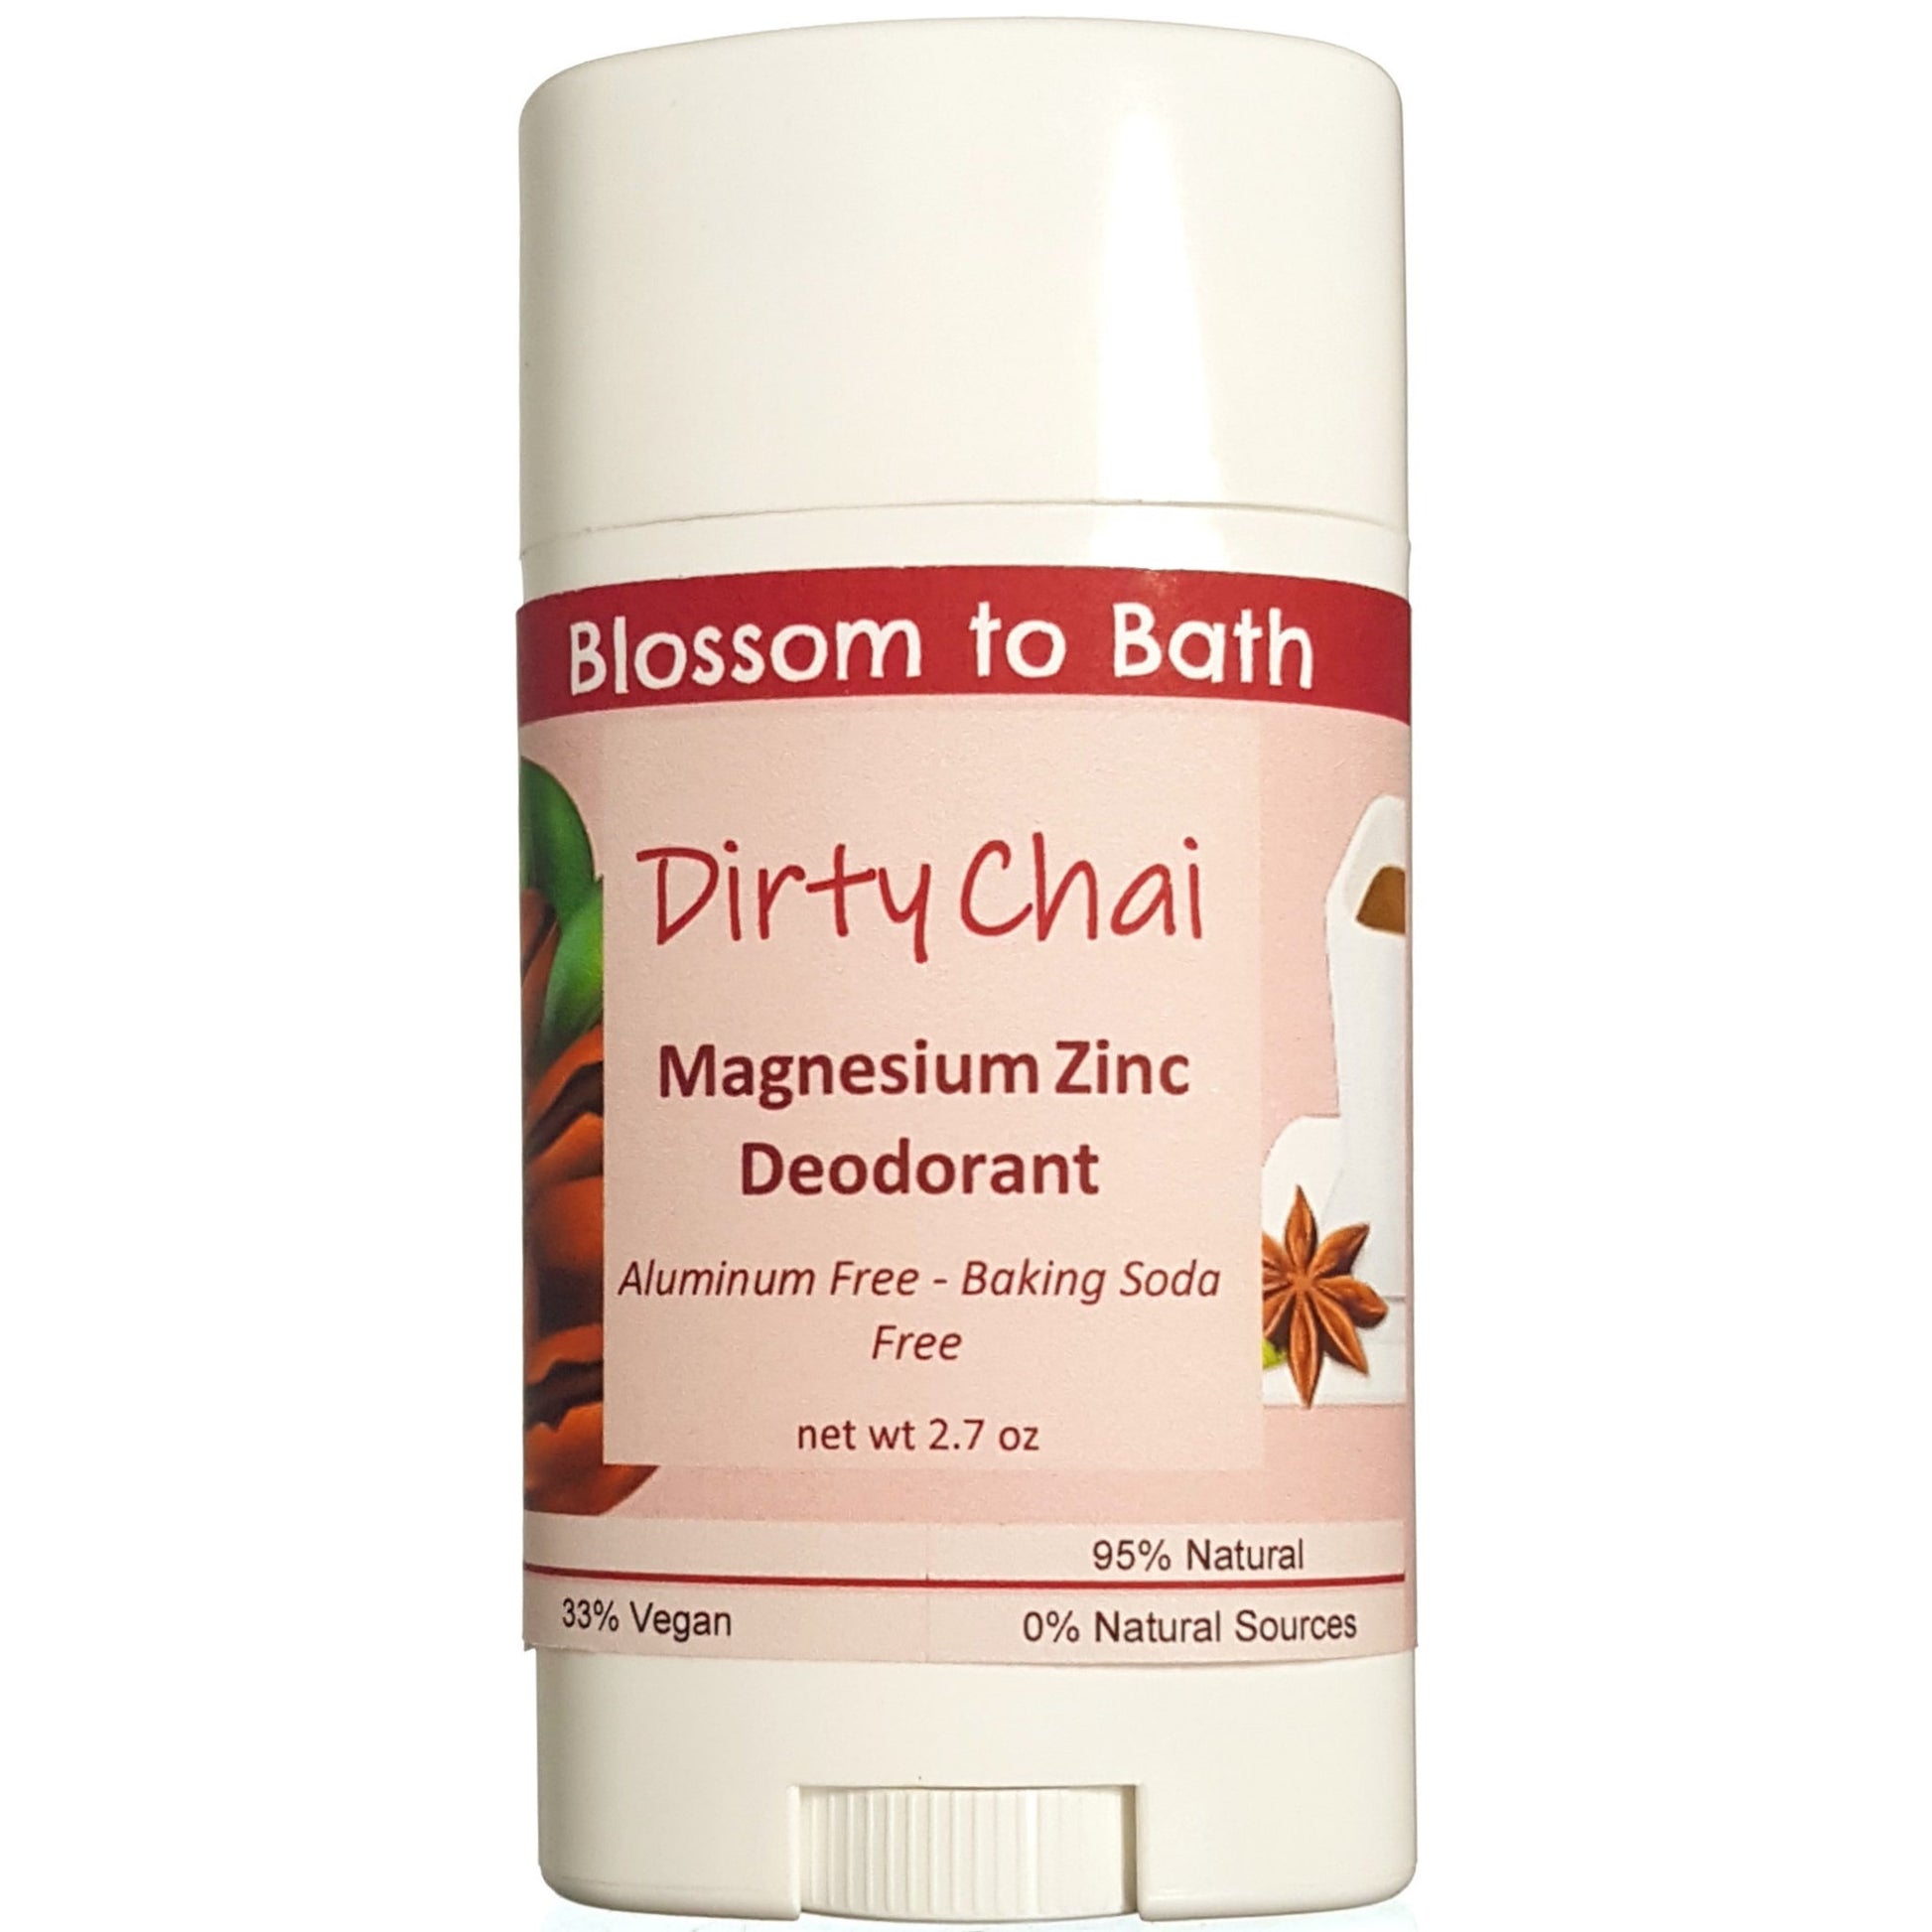 Buy Blossom to Bath Dirty Chai Magnesium Zinc Deodorant from Flowersong Soap Studio.  Long lasting protection made from organic botanicals and butters, made without baking soda, tested in the Arizona heat  A shot of rich espresso in a swirl of exotic warm clove and cardamom.